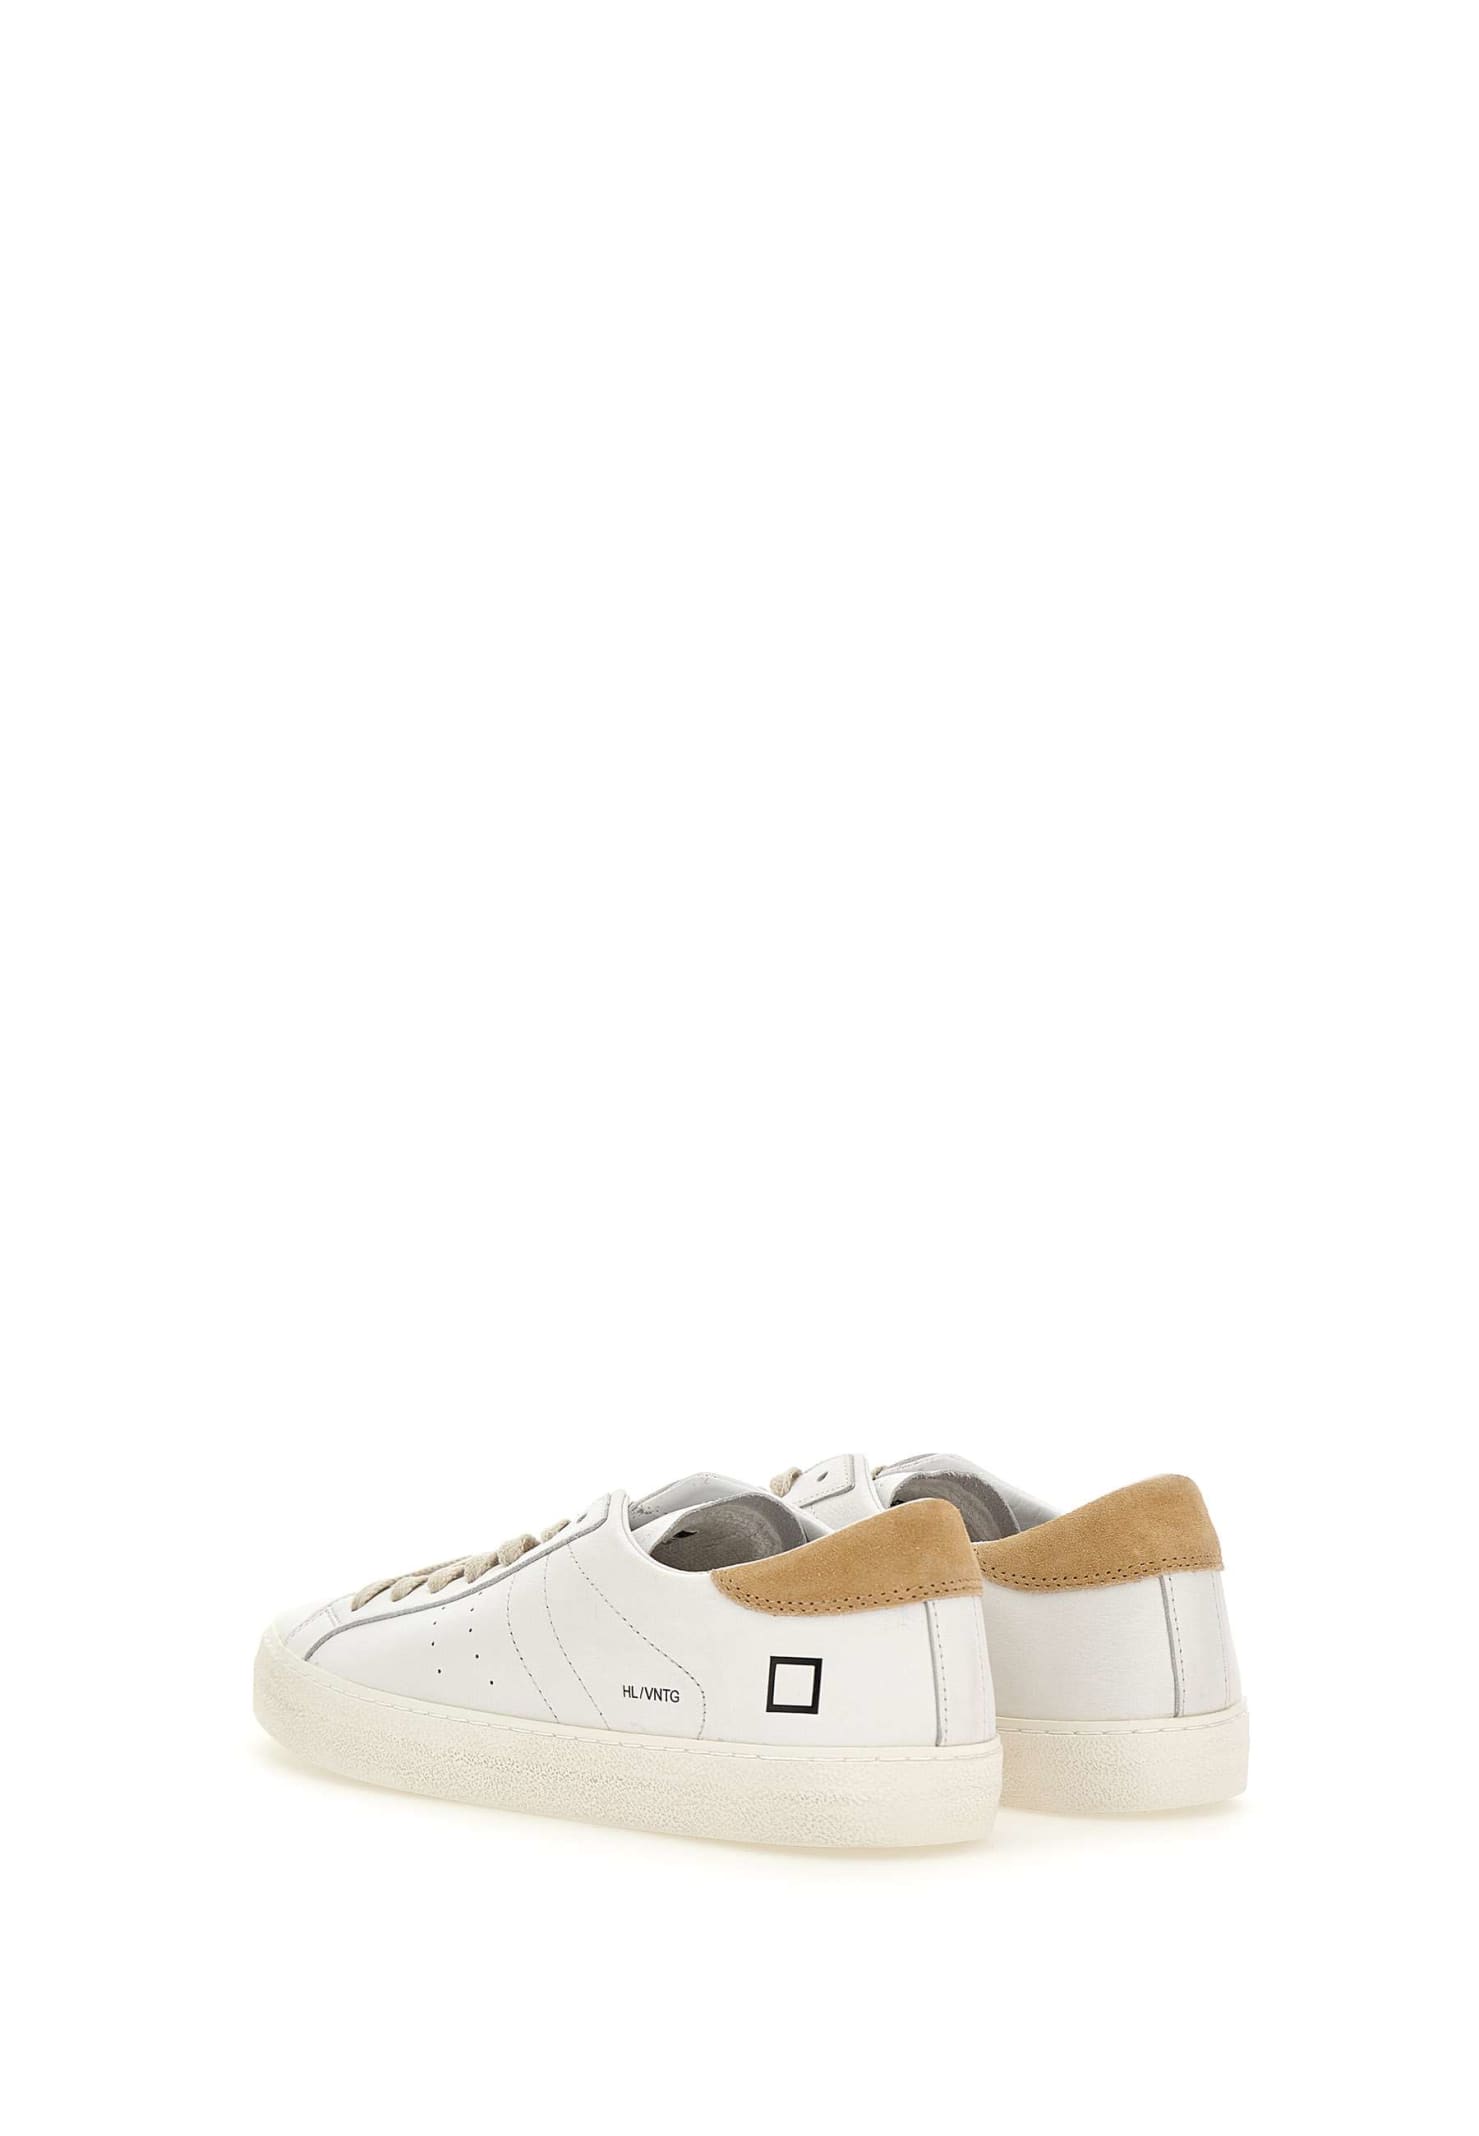 Shop Date Hillow Vintage Calf Leather Sneakers In White